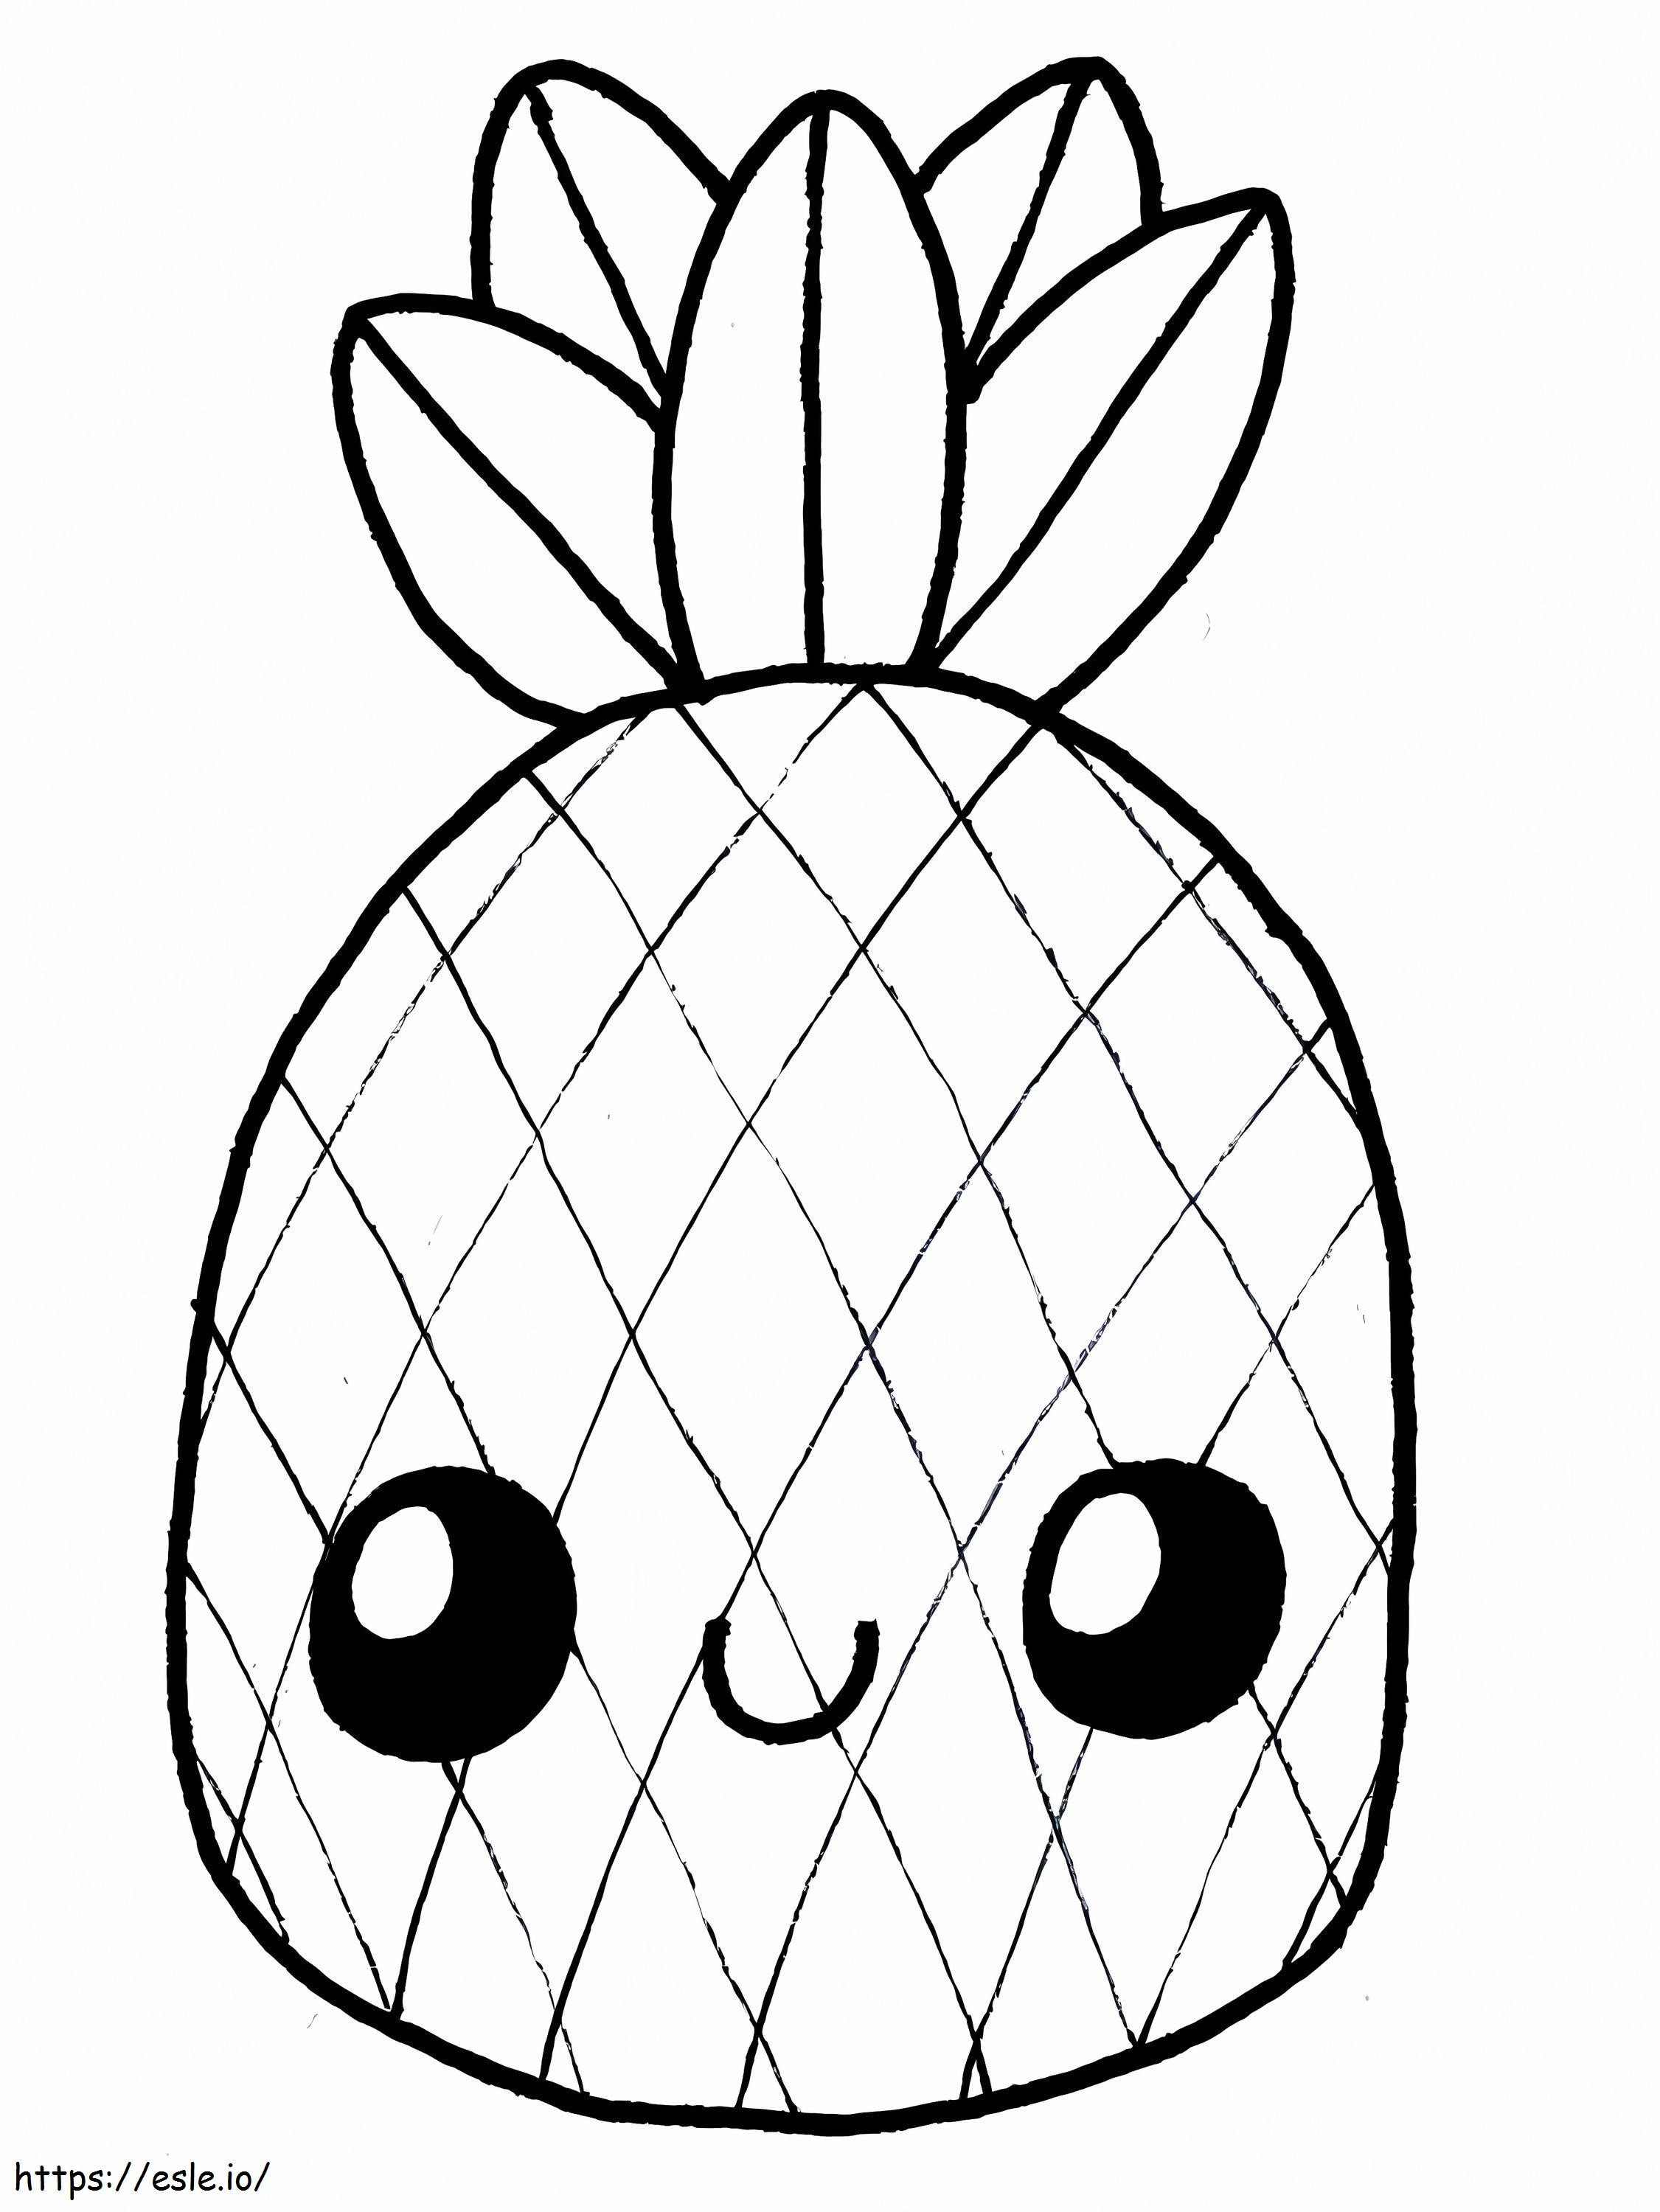 Cute Pineapple Smiling coloring page